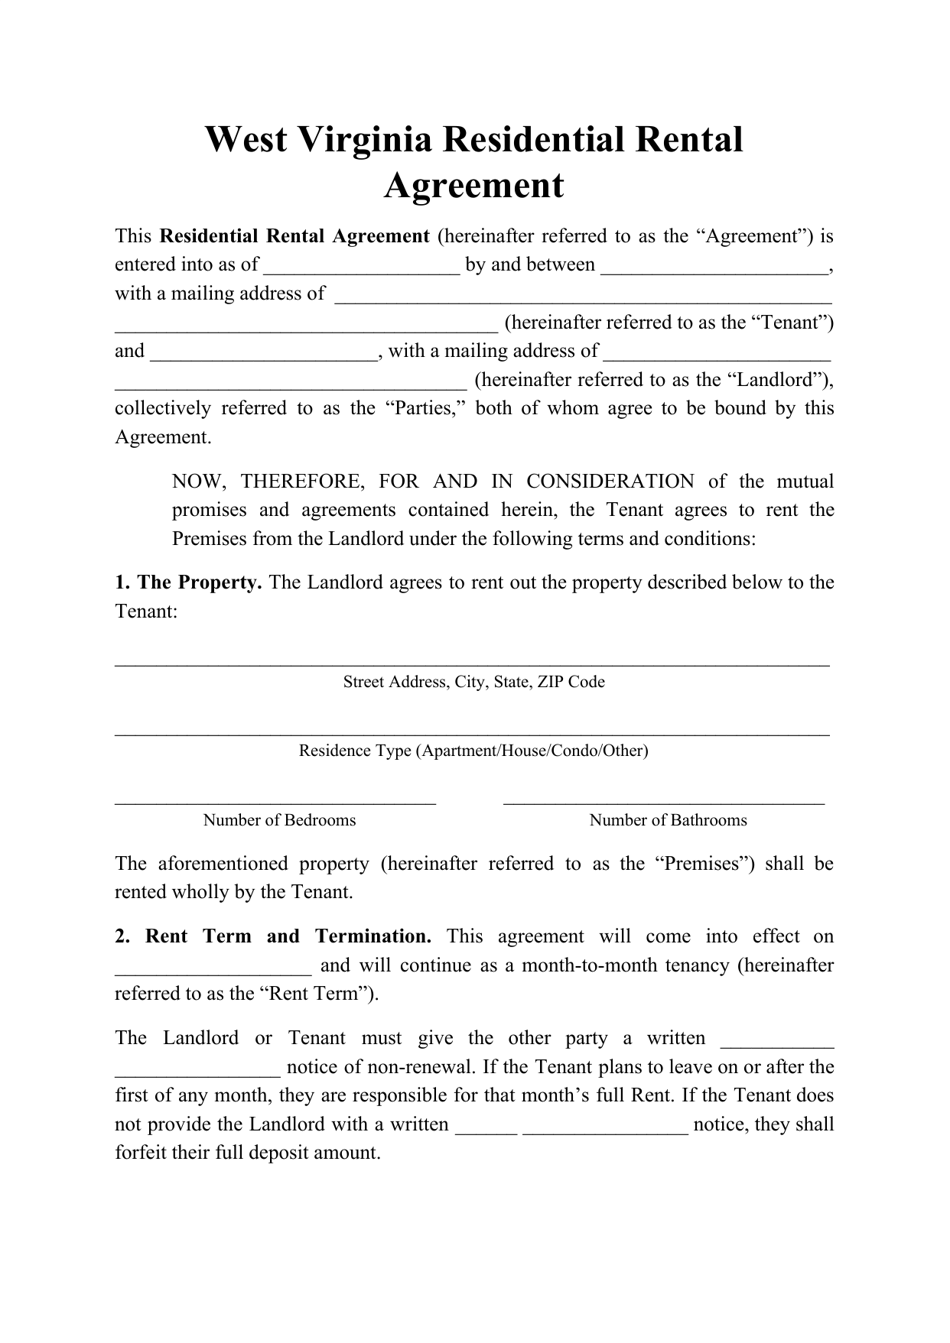 Residential Rental Agreement Template - West Virginia, Page 1